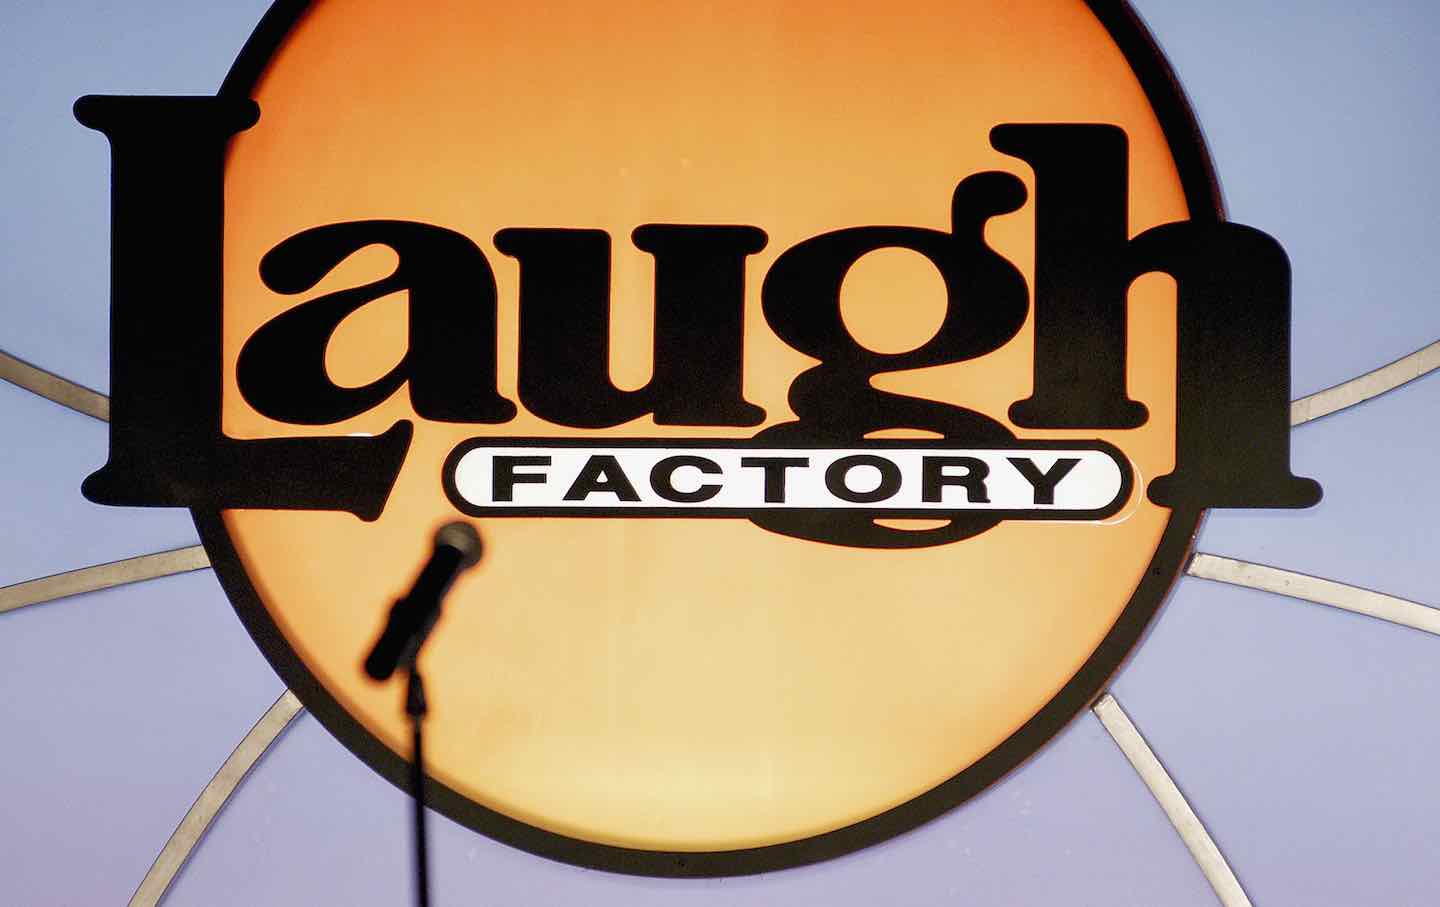 The New York location of the Laugh Factory, 2004.